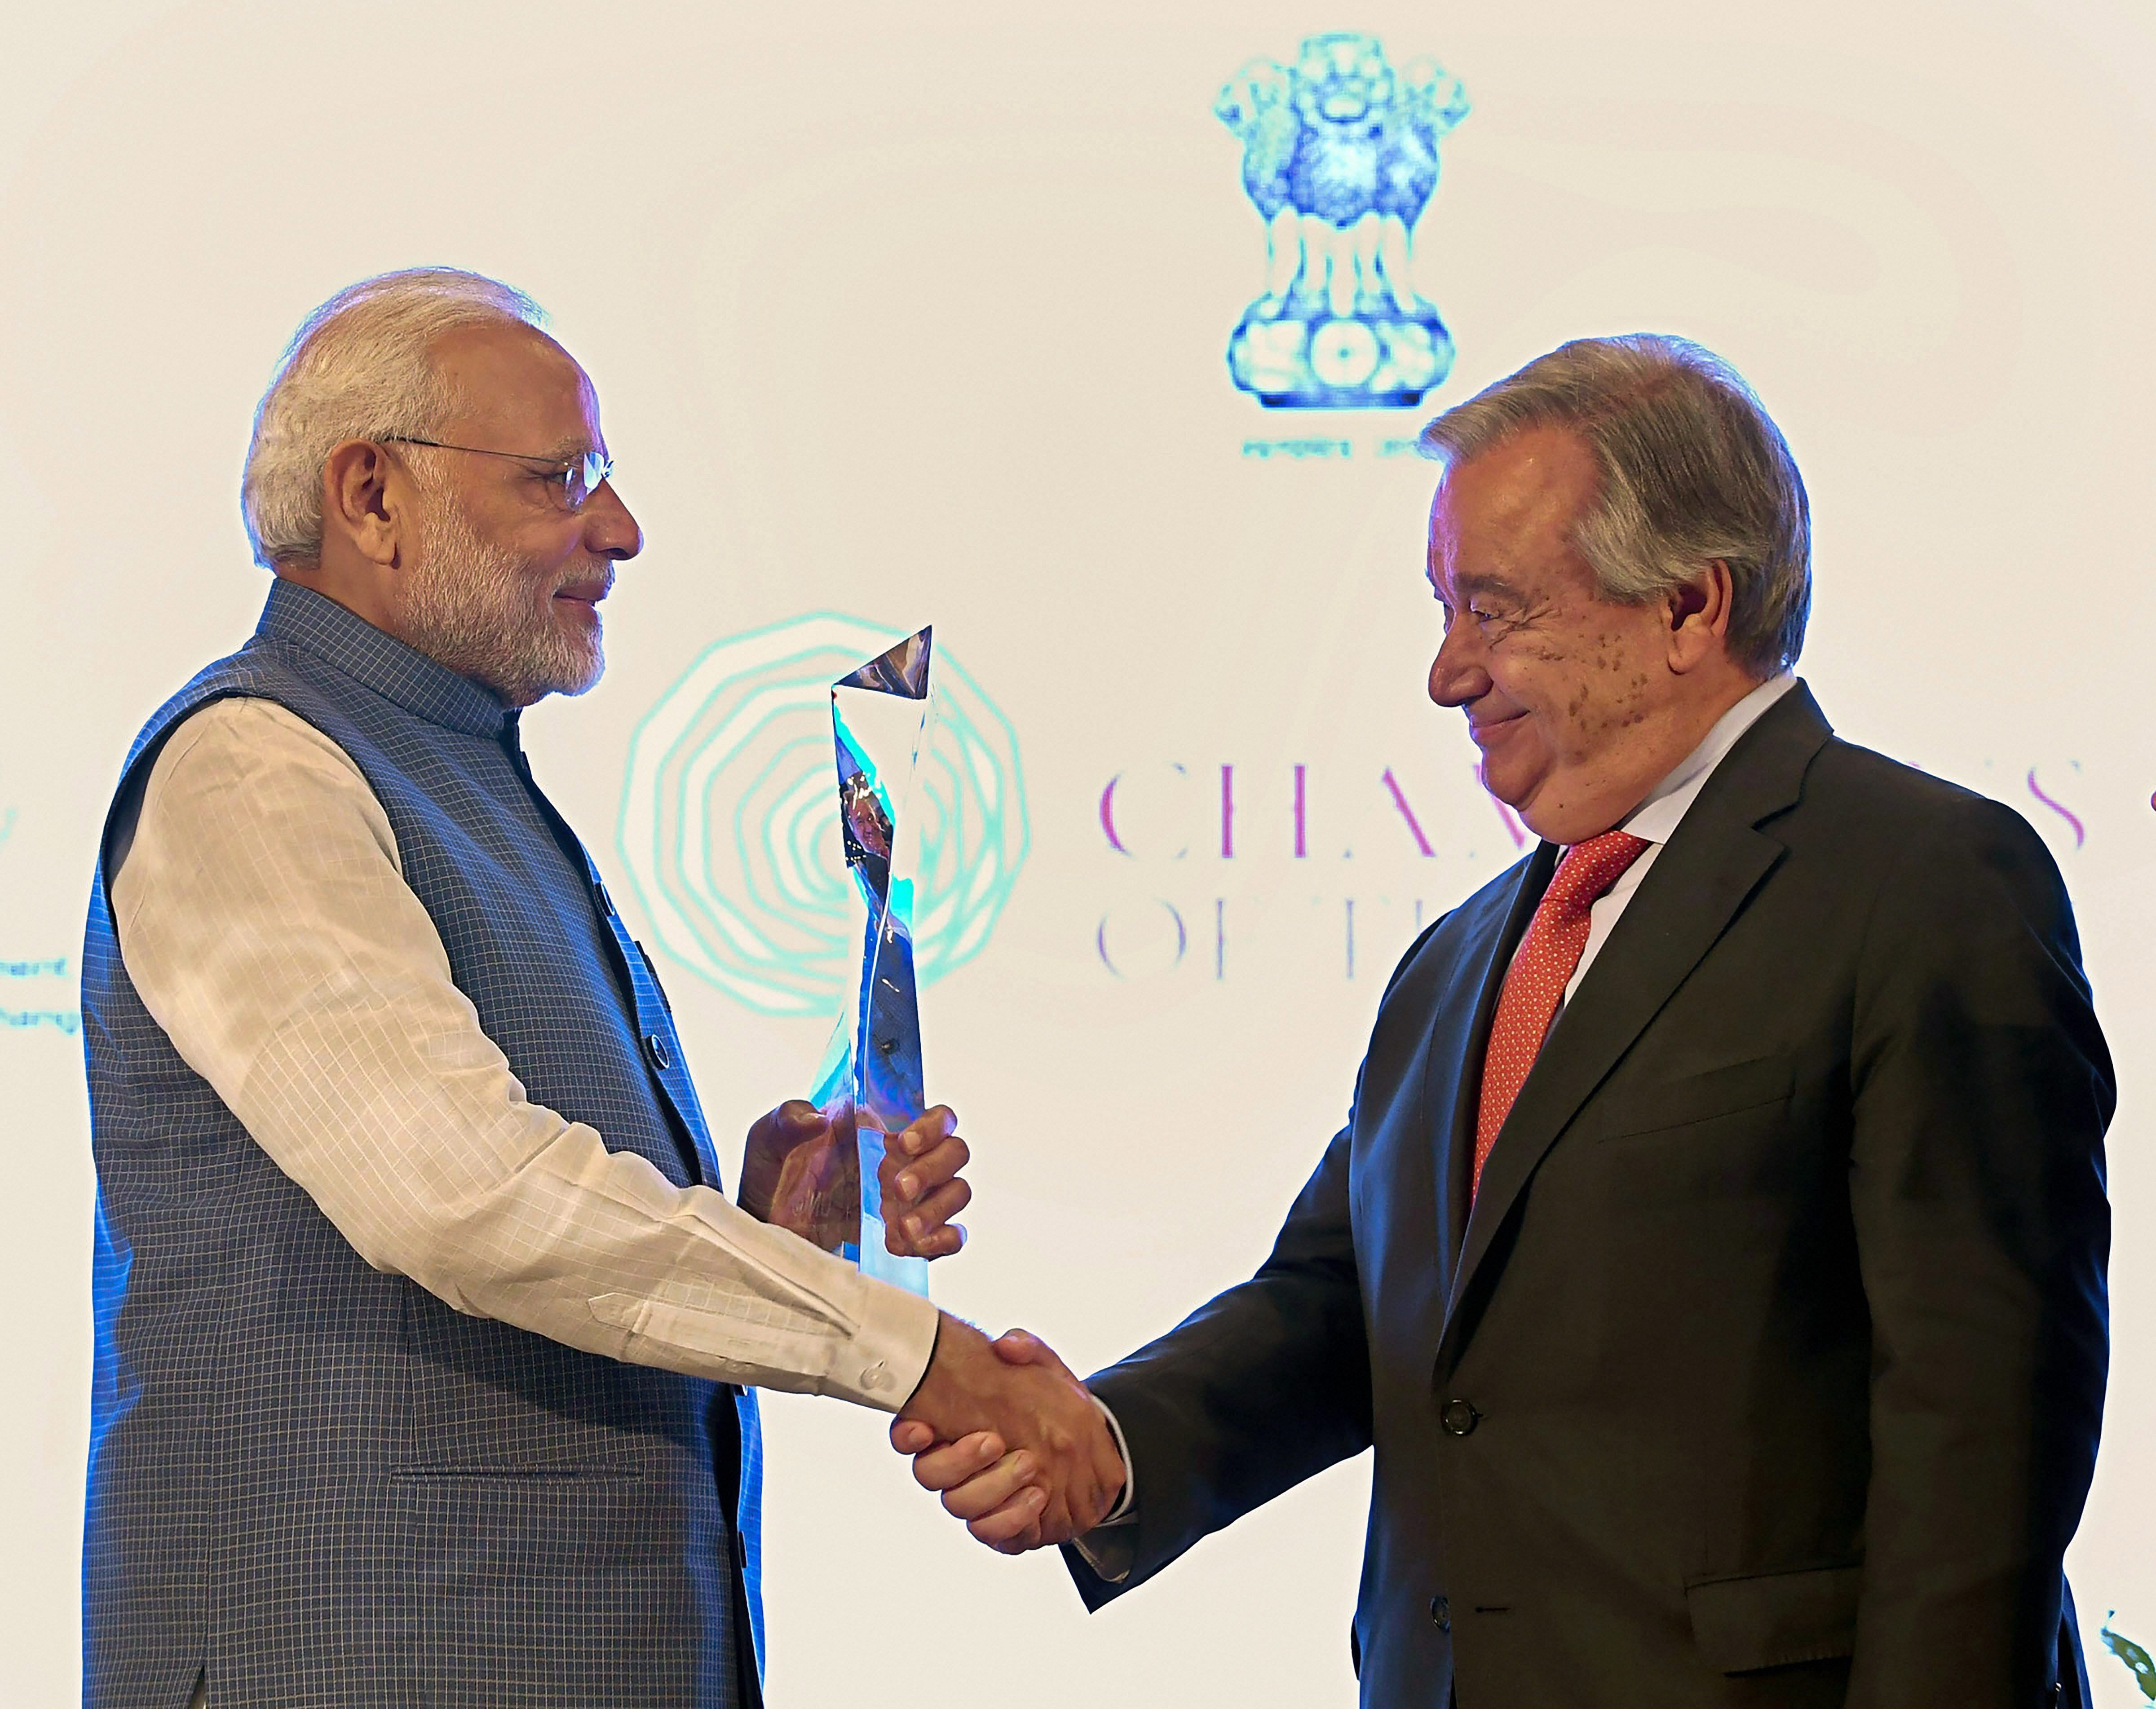 Prime Minister Narendra Modi greets United Nations Secretary General Antonio Guterres after receiving UN's highest environmental honour 'Champions of The Earth Award' at a special ceremony, in New Delhi on Wednesday. (PIB Photo via PTI)